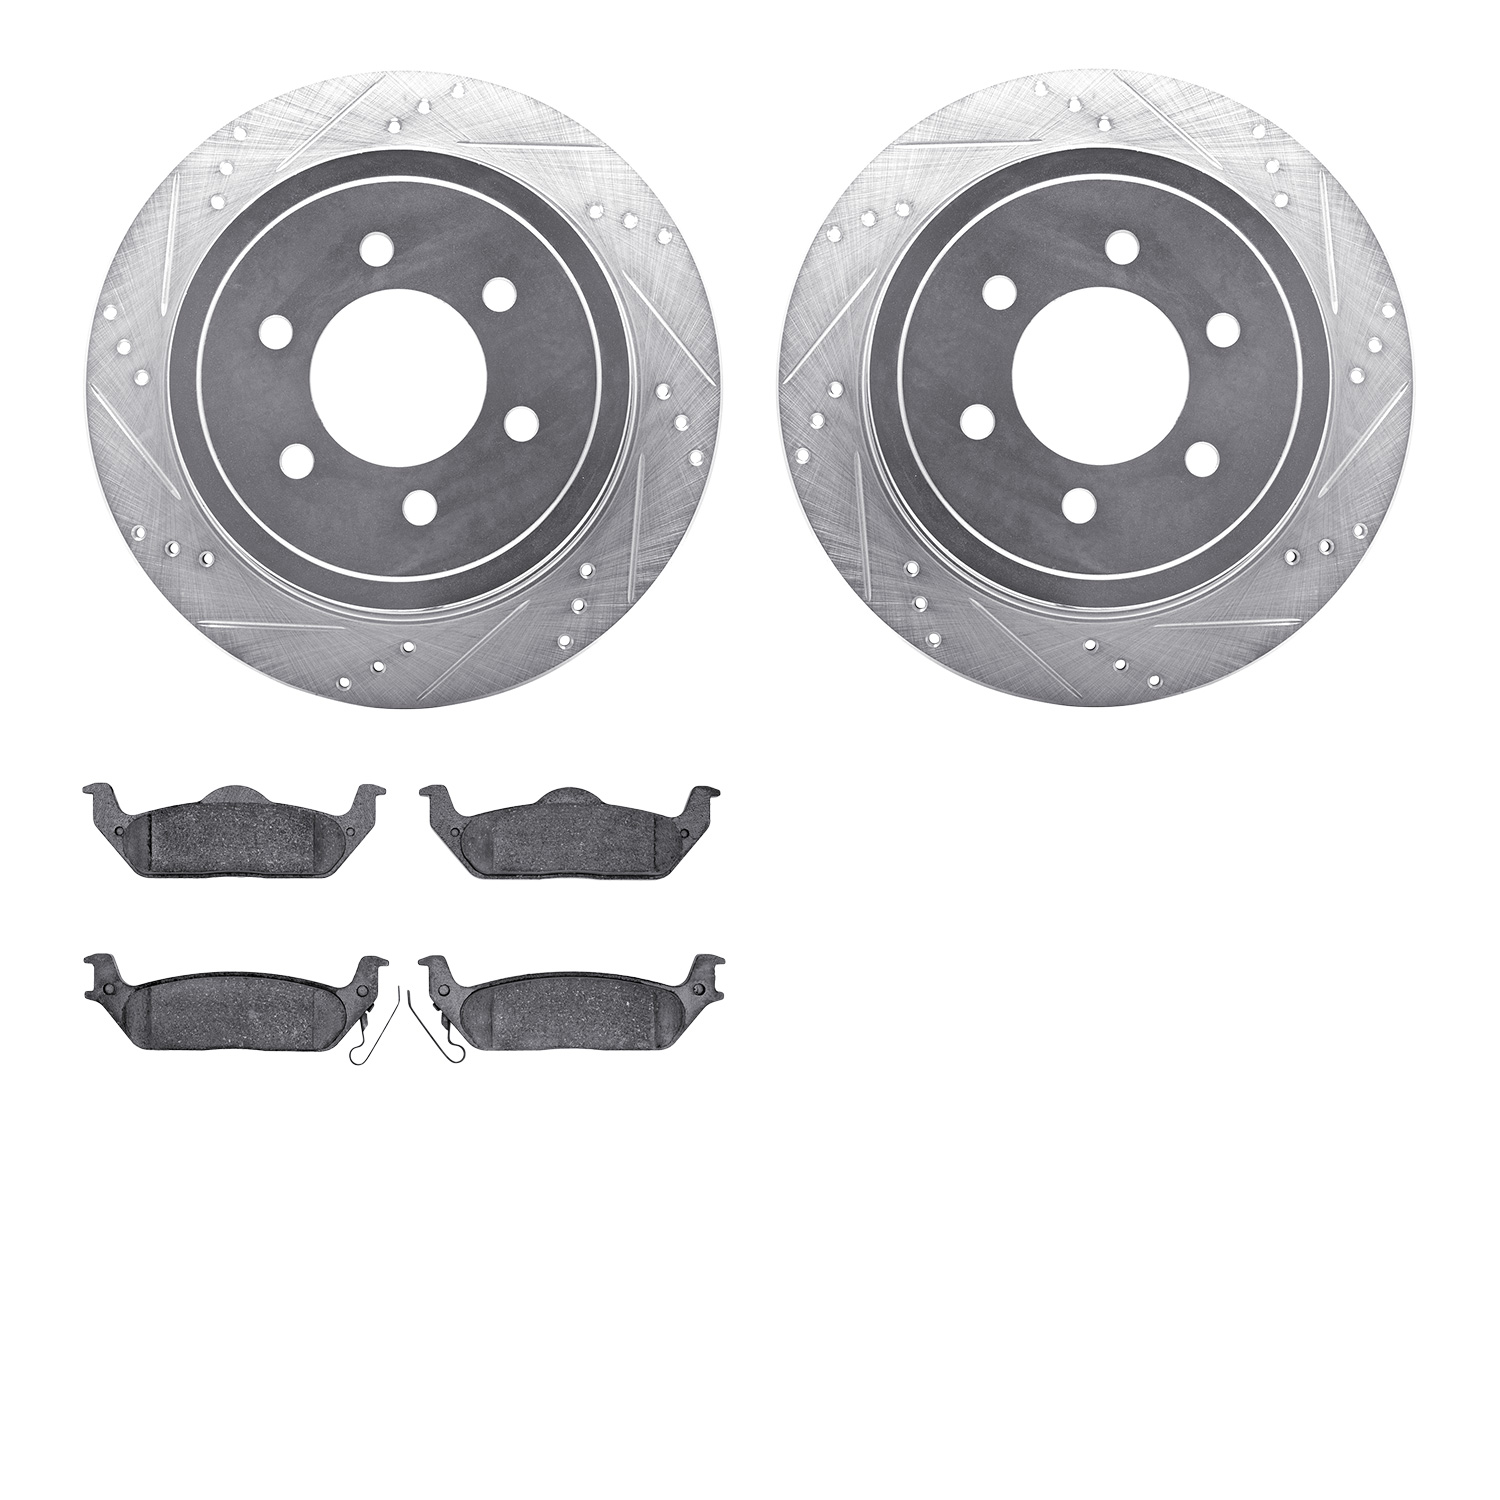 7402-54074 Drilled/Slotted Brake Rotors with Ultimate-Duty Brake Pads Kit [Silver], 2004-2011 Ford/Lincoln/Mercury/Mazda, Positi